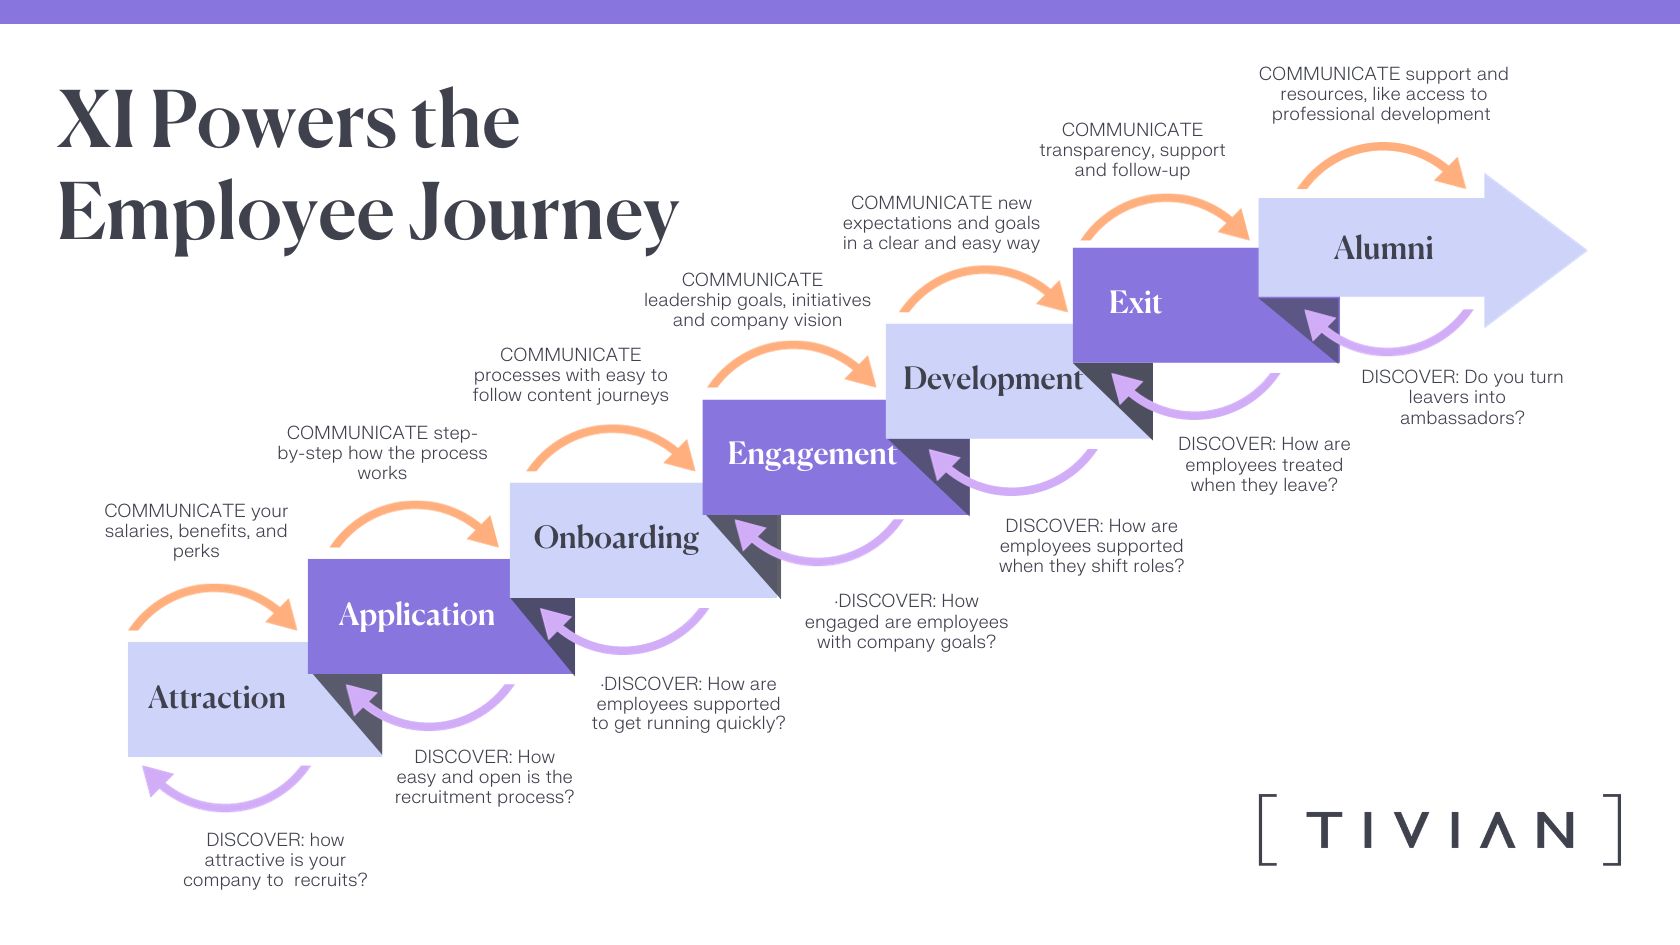 employee journey with communicate and discover